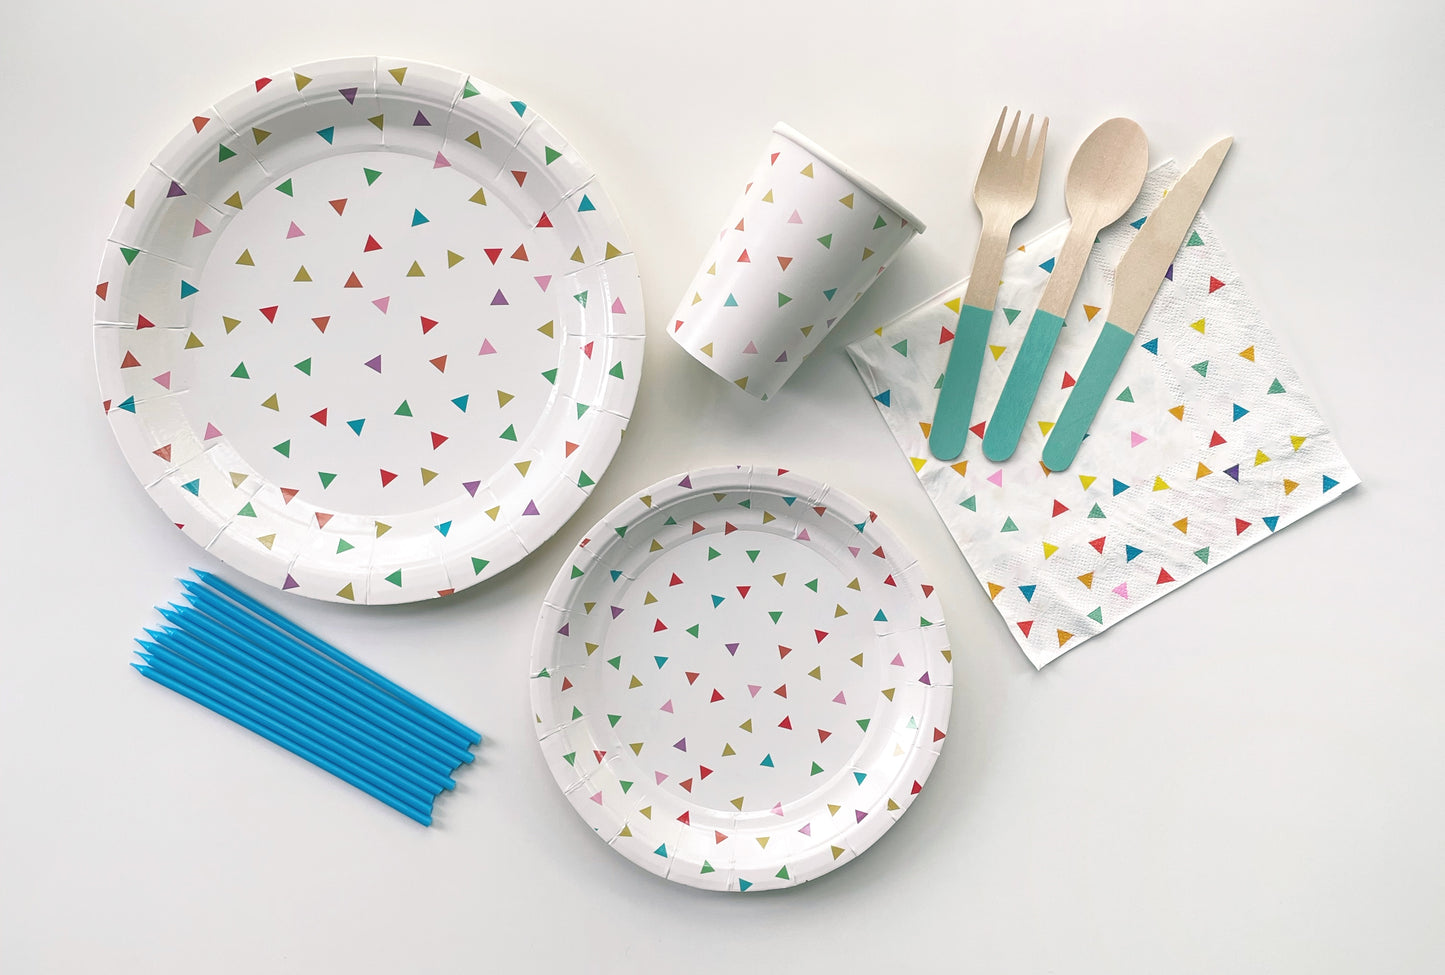 The Tiny Triangle Party Kit including large paper party plates, small paper party plates, paper cups, paper napkins, blue dipped wooden utensils and tall teal birthday candles. The triangle pattern features green, orange, pink, blue and yellow colours.